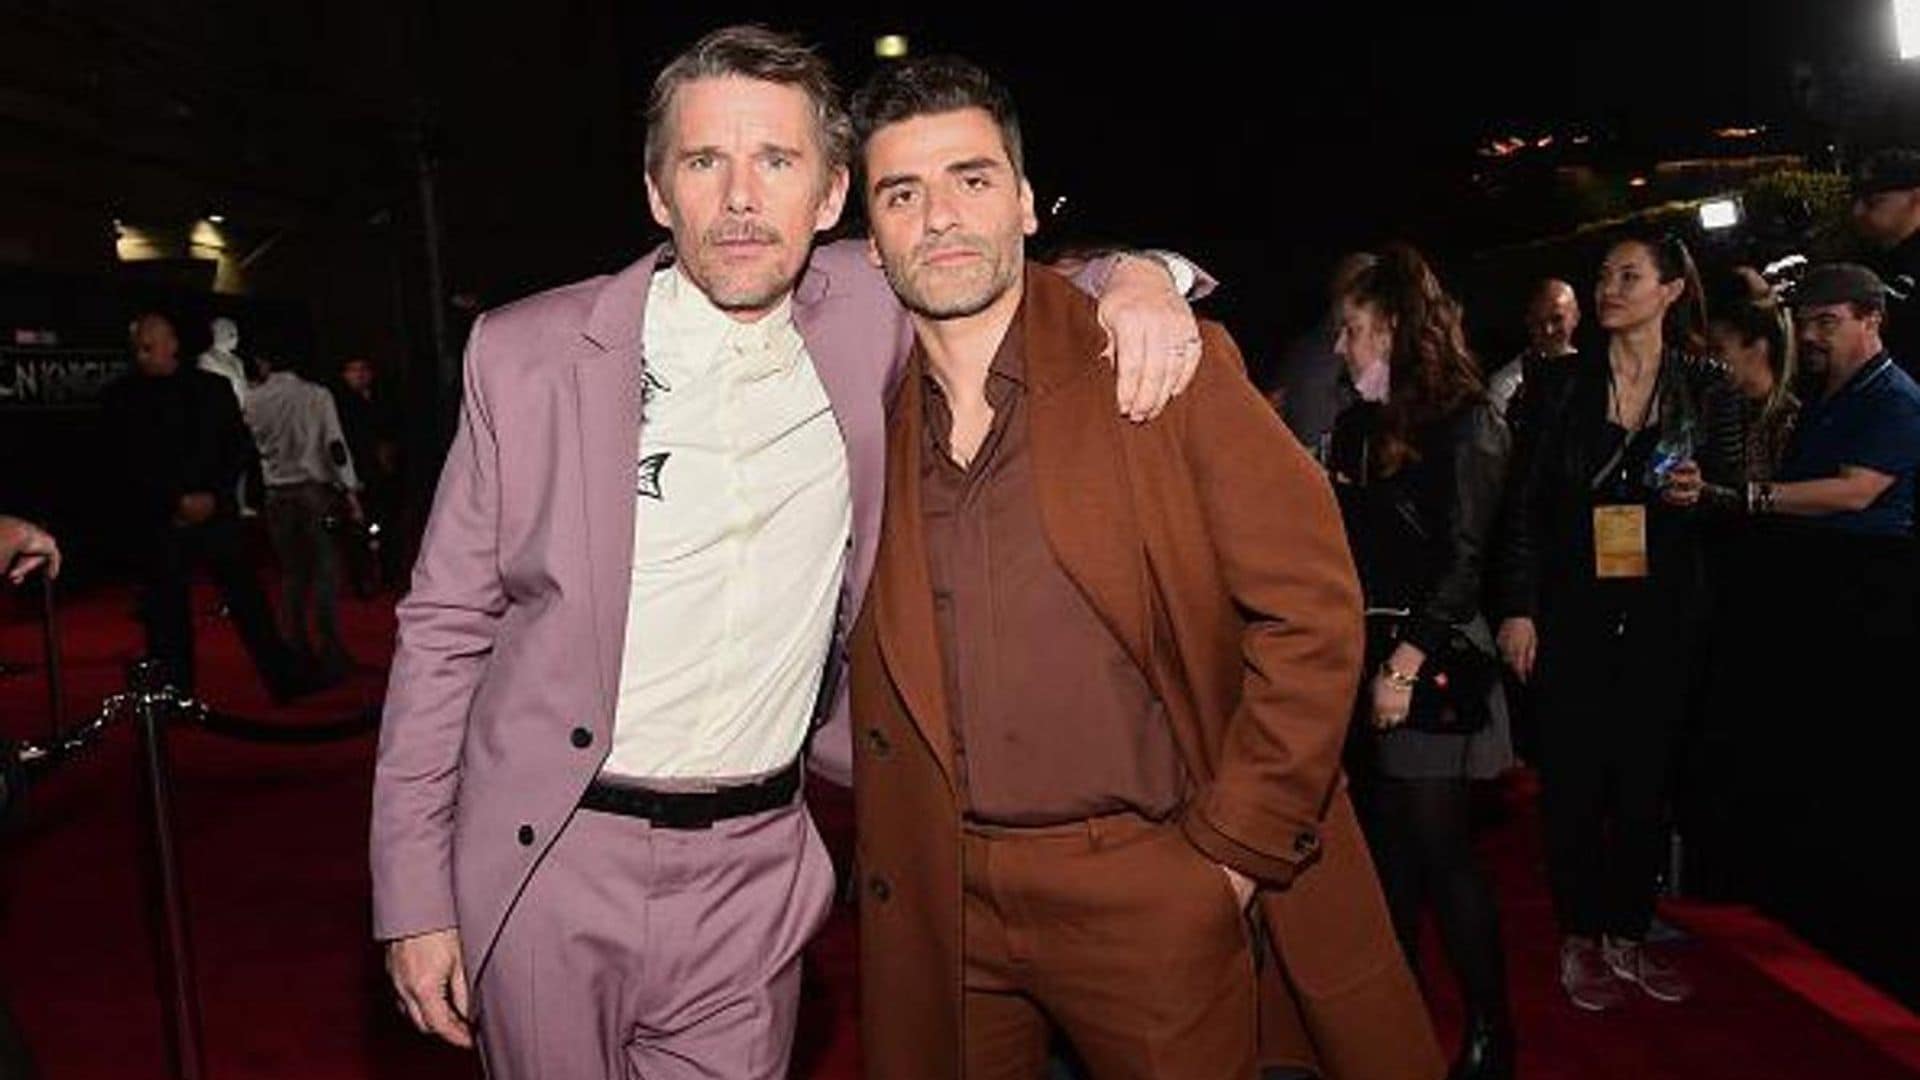 Oscar Isaac says he and Ethan Hawke ‘danced with God’ after eating magic mushrooms